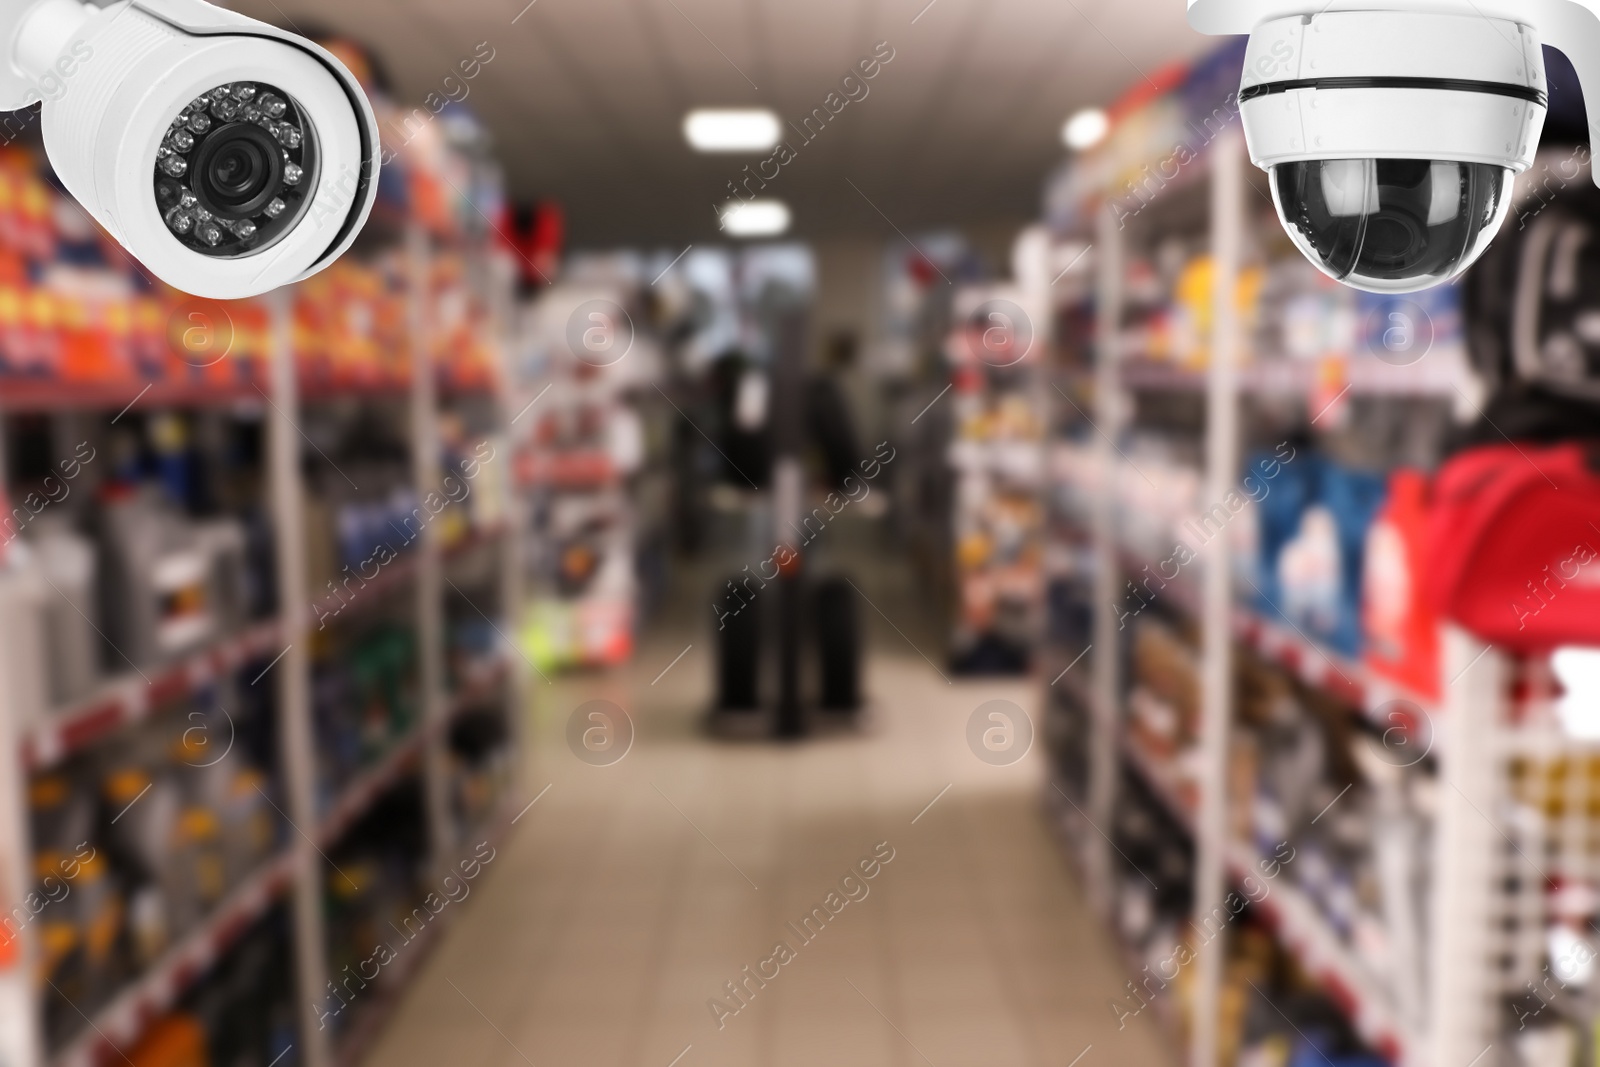 Image of Modern CCTV security cameras in auto store. Guard equipment